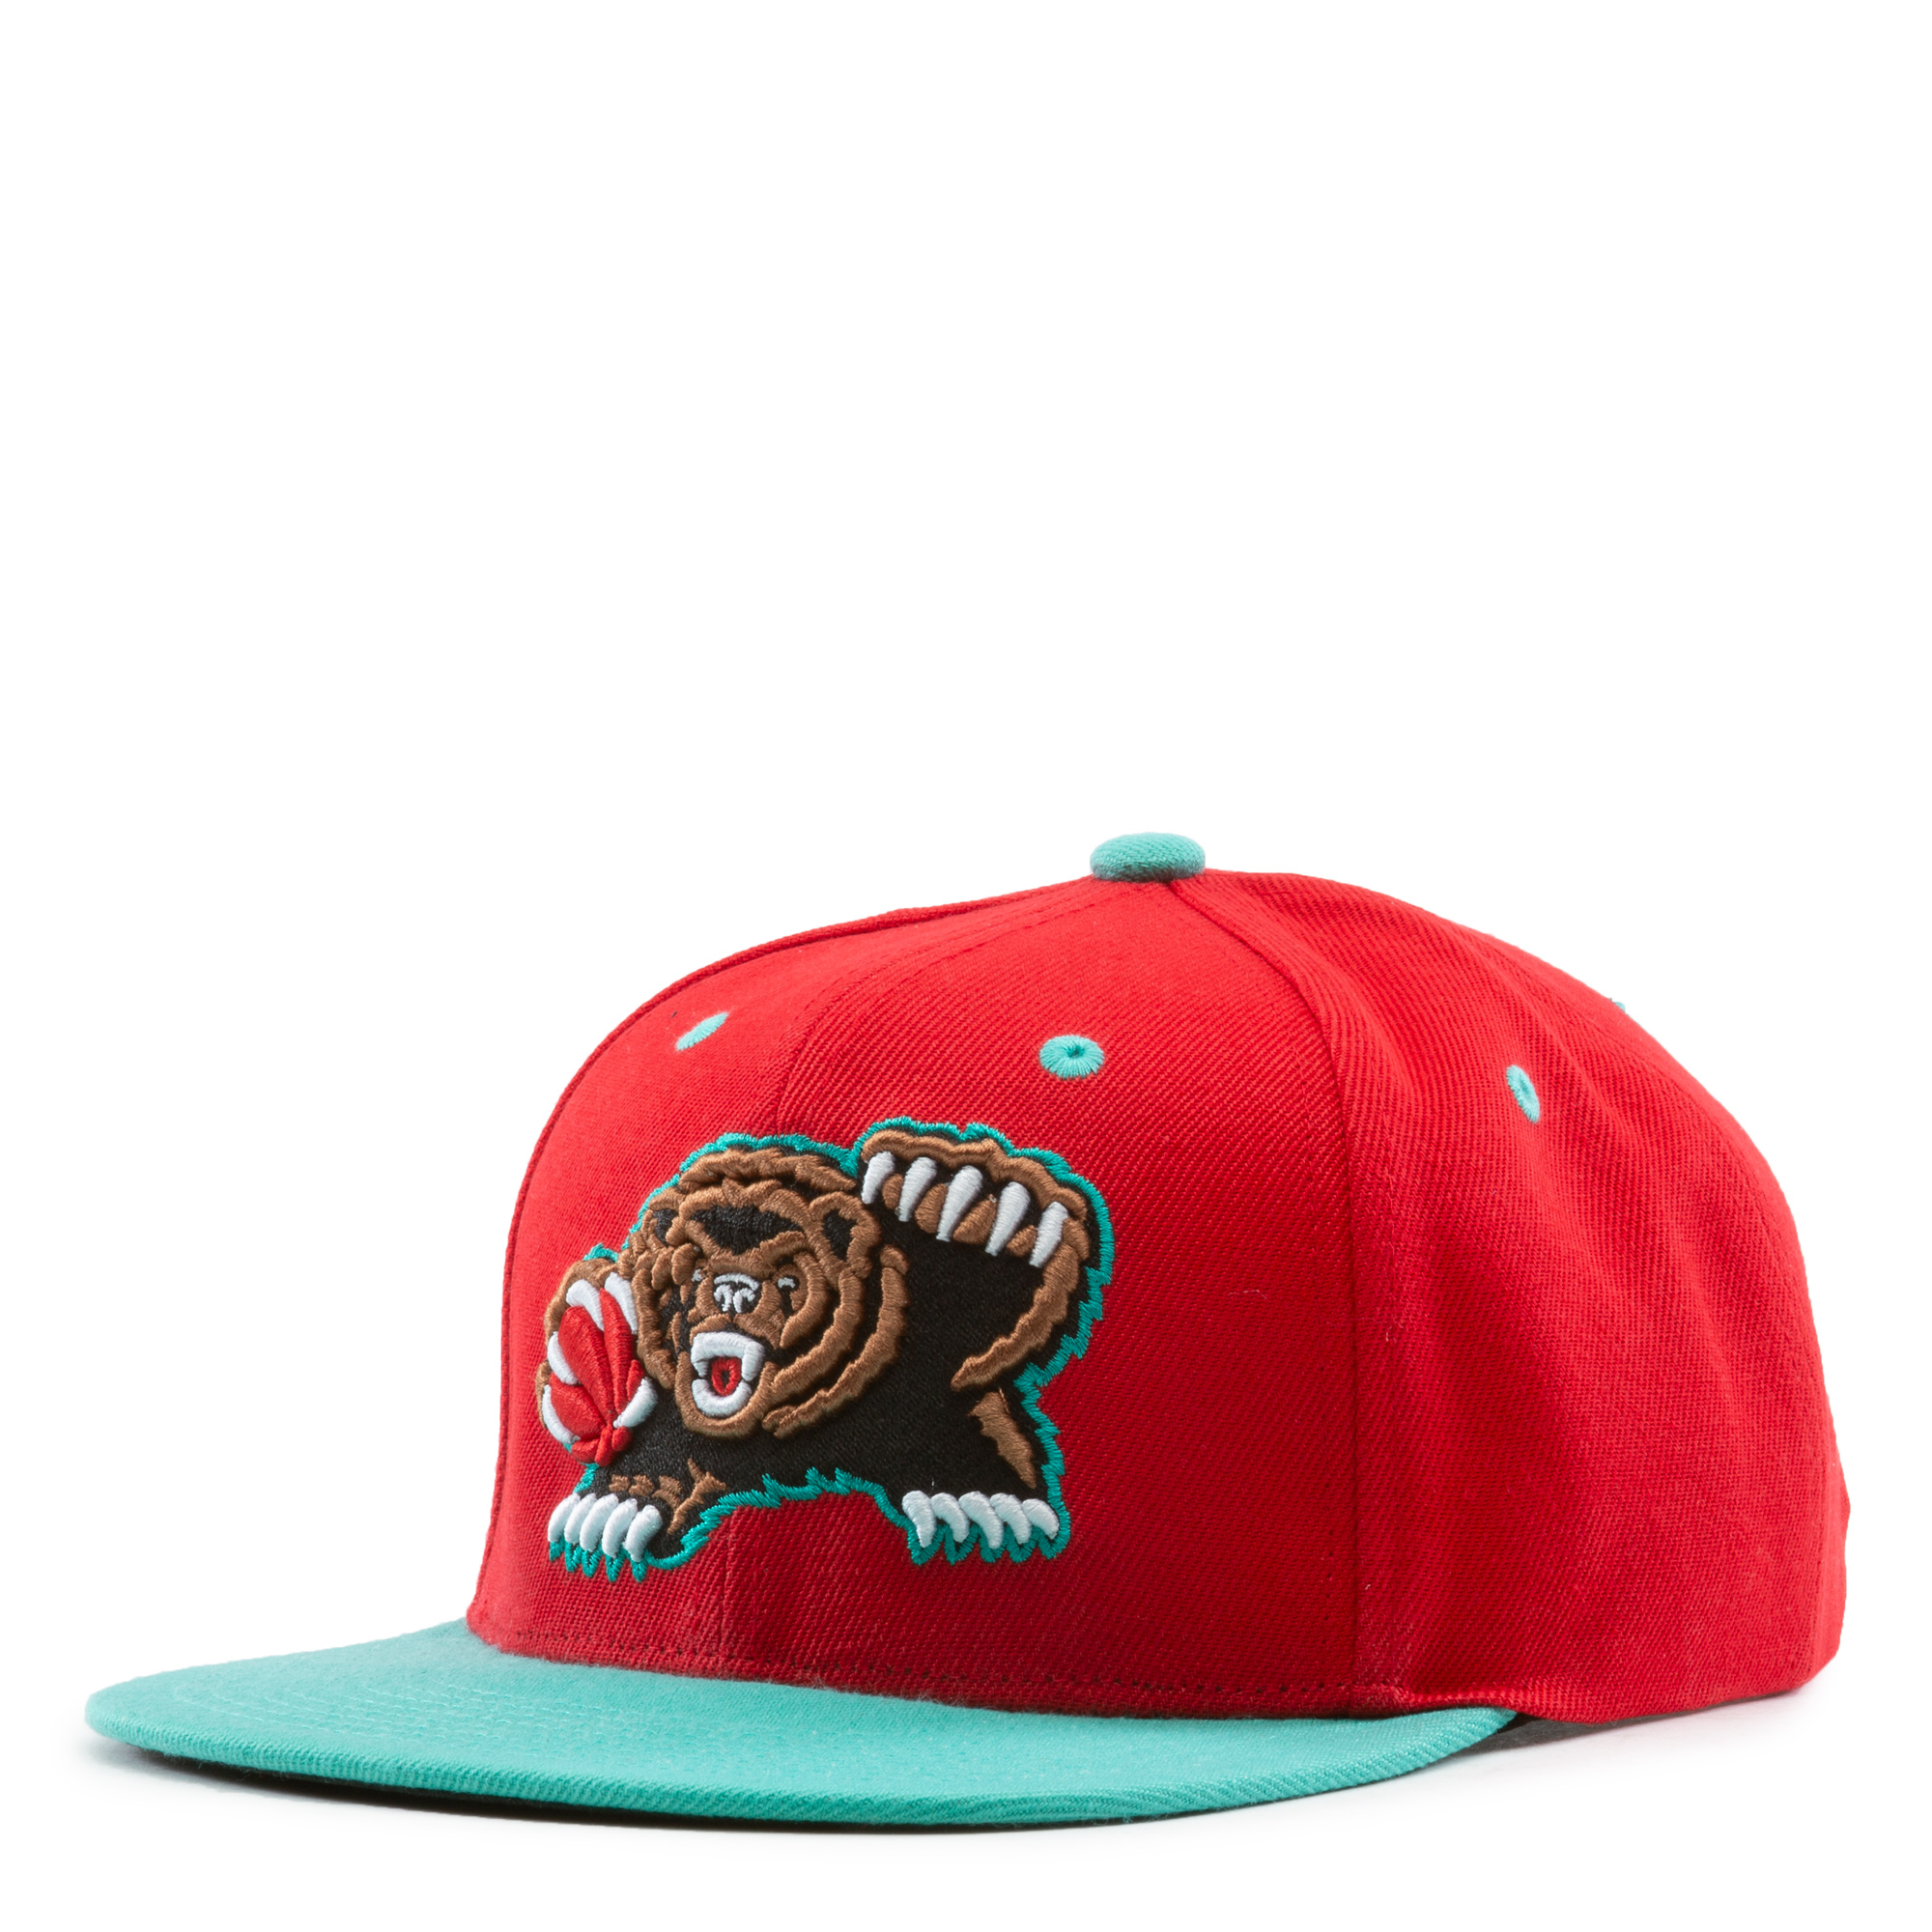 Mitchell & Ness Vancouver Grizzlies Team Basketball Big Face Snapback Hat  Cap - Sand/Teal